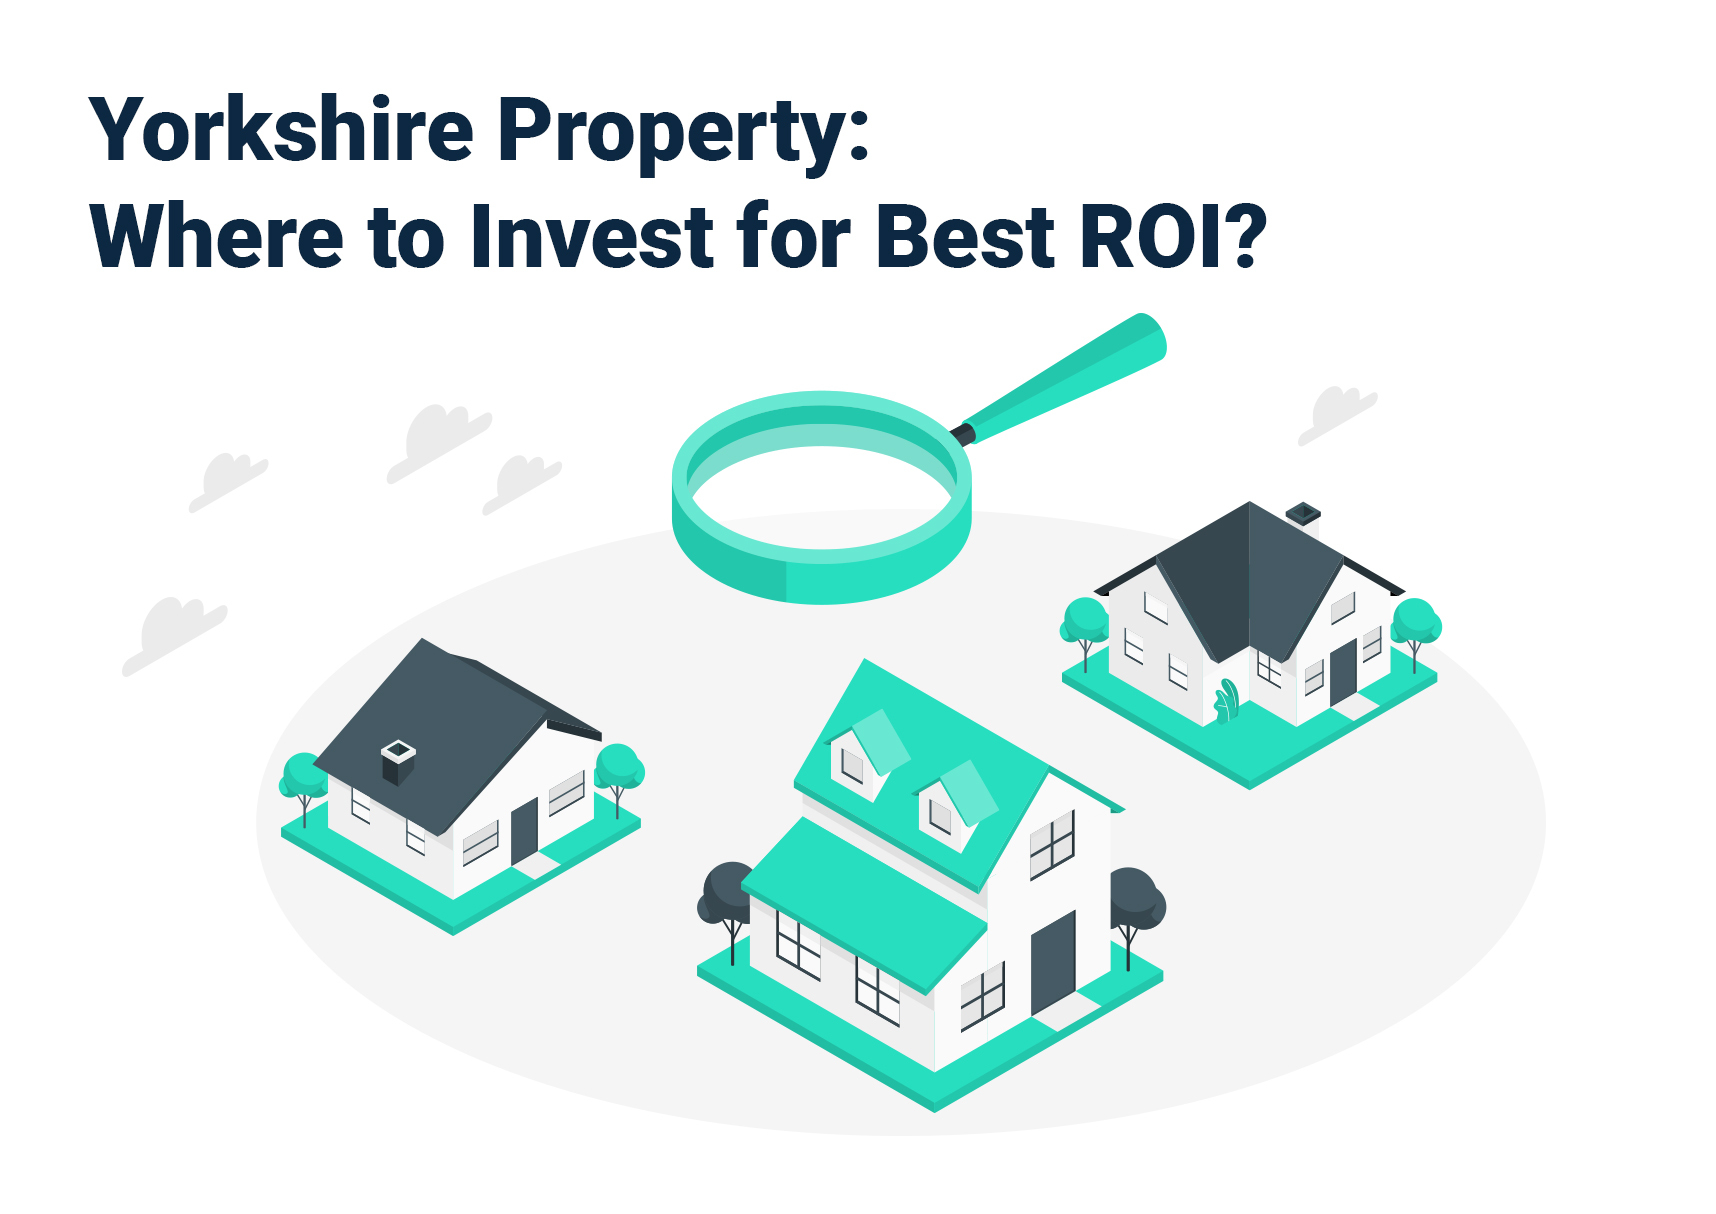 Yorkshire Property: Where to Invest for Best ROI?